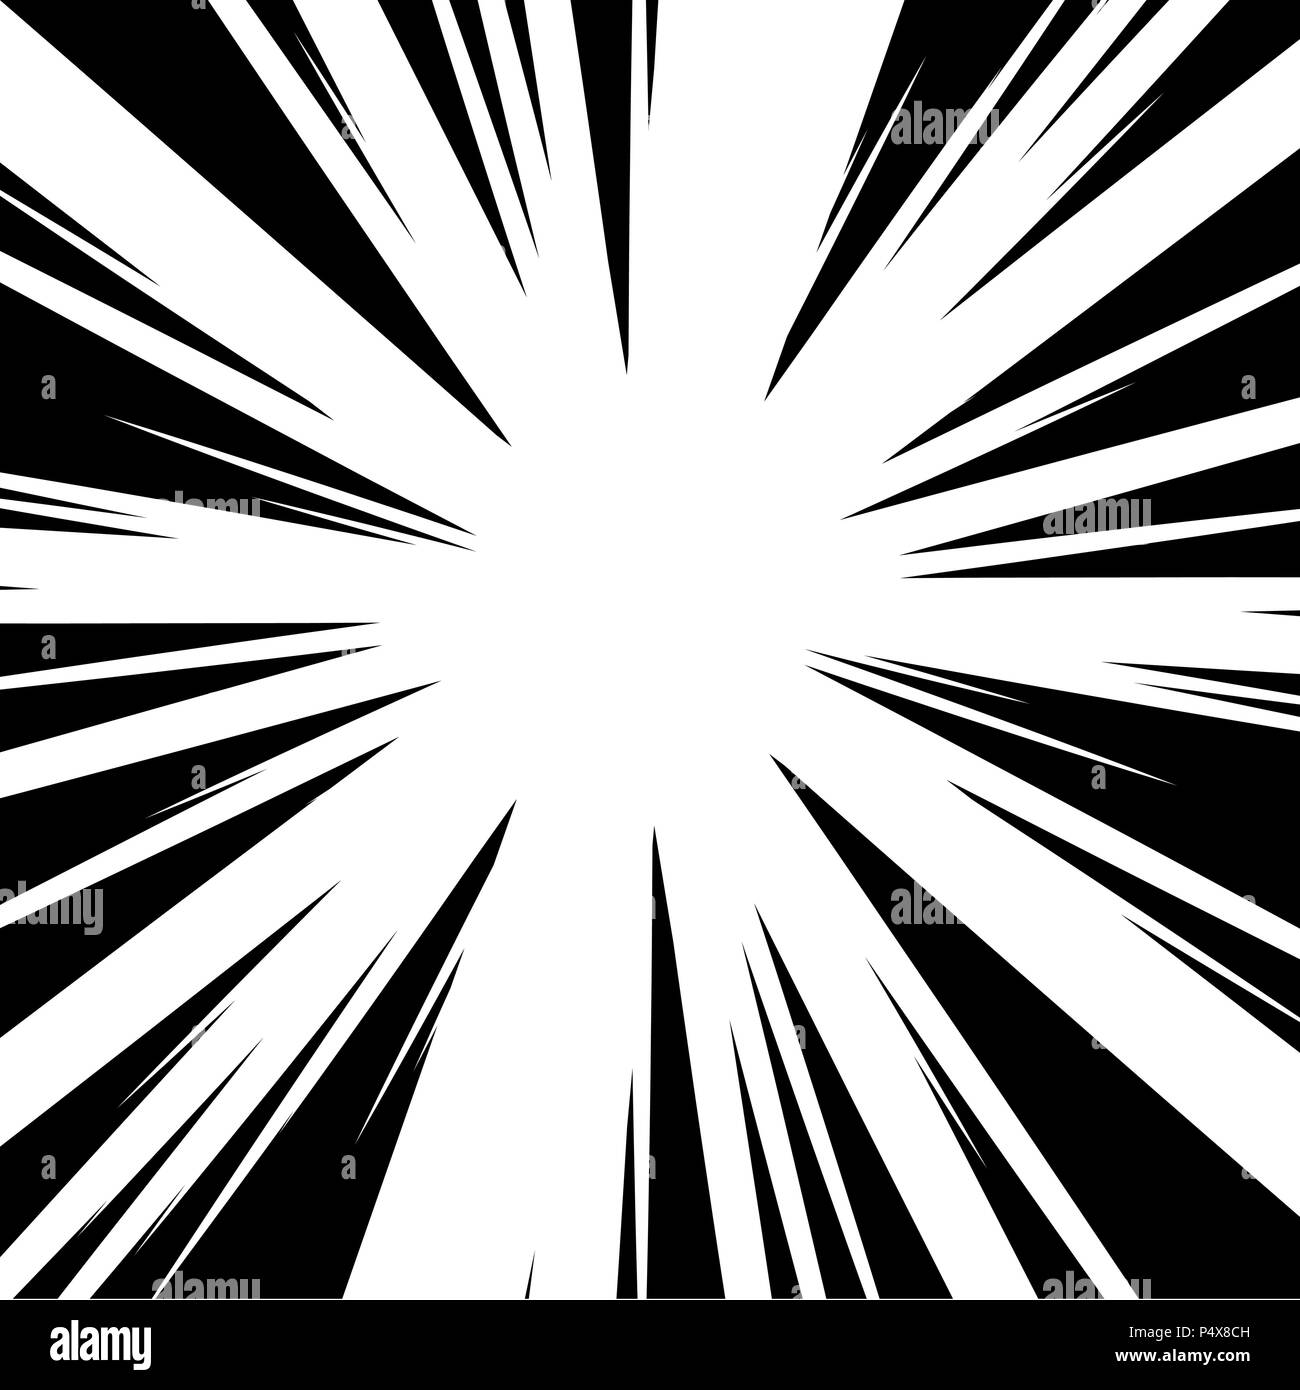 Comic strip radial motion lines set. Anime comics book hero speed or fight  action texture rays. Manga cartoon drawing explosions background  collection. Vector eps illustration 7165804 Vector Art at Vecteezy